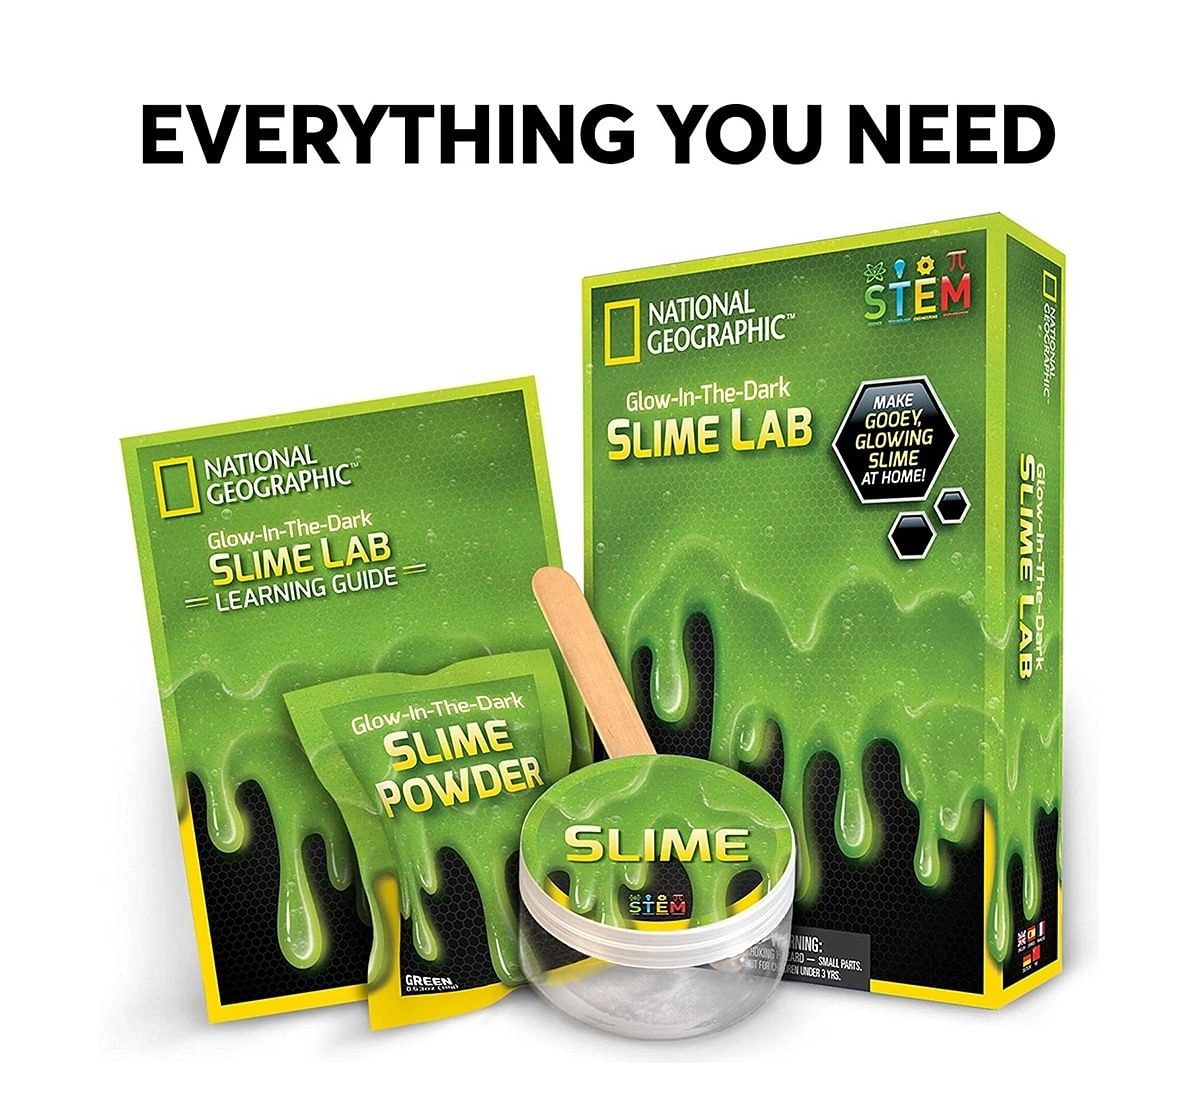 National Geographic Slime DIY Science Lab for Kids age 6Y+ (Green)